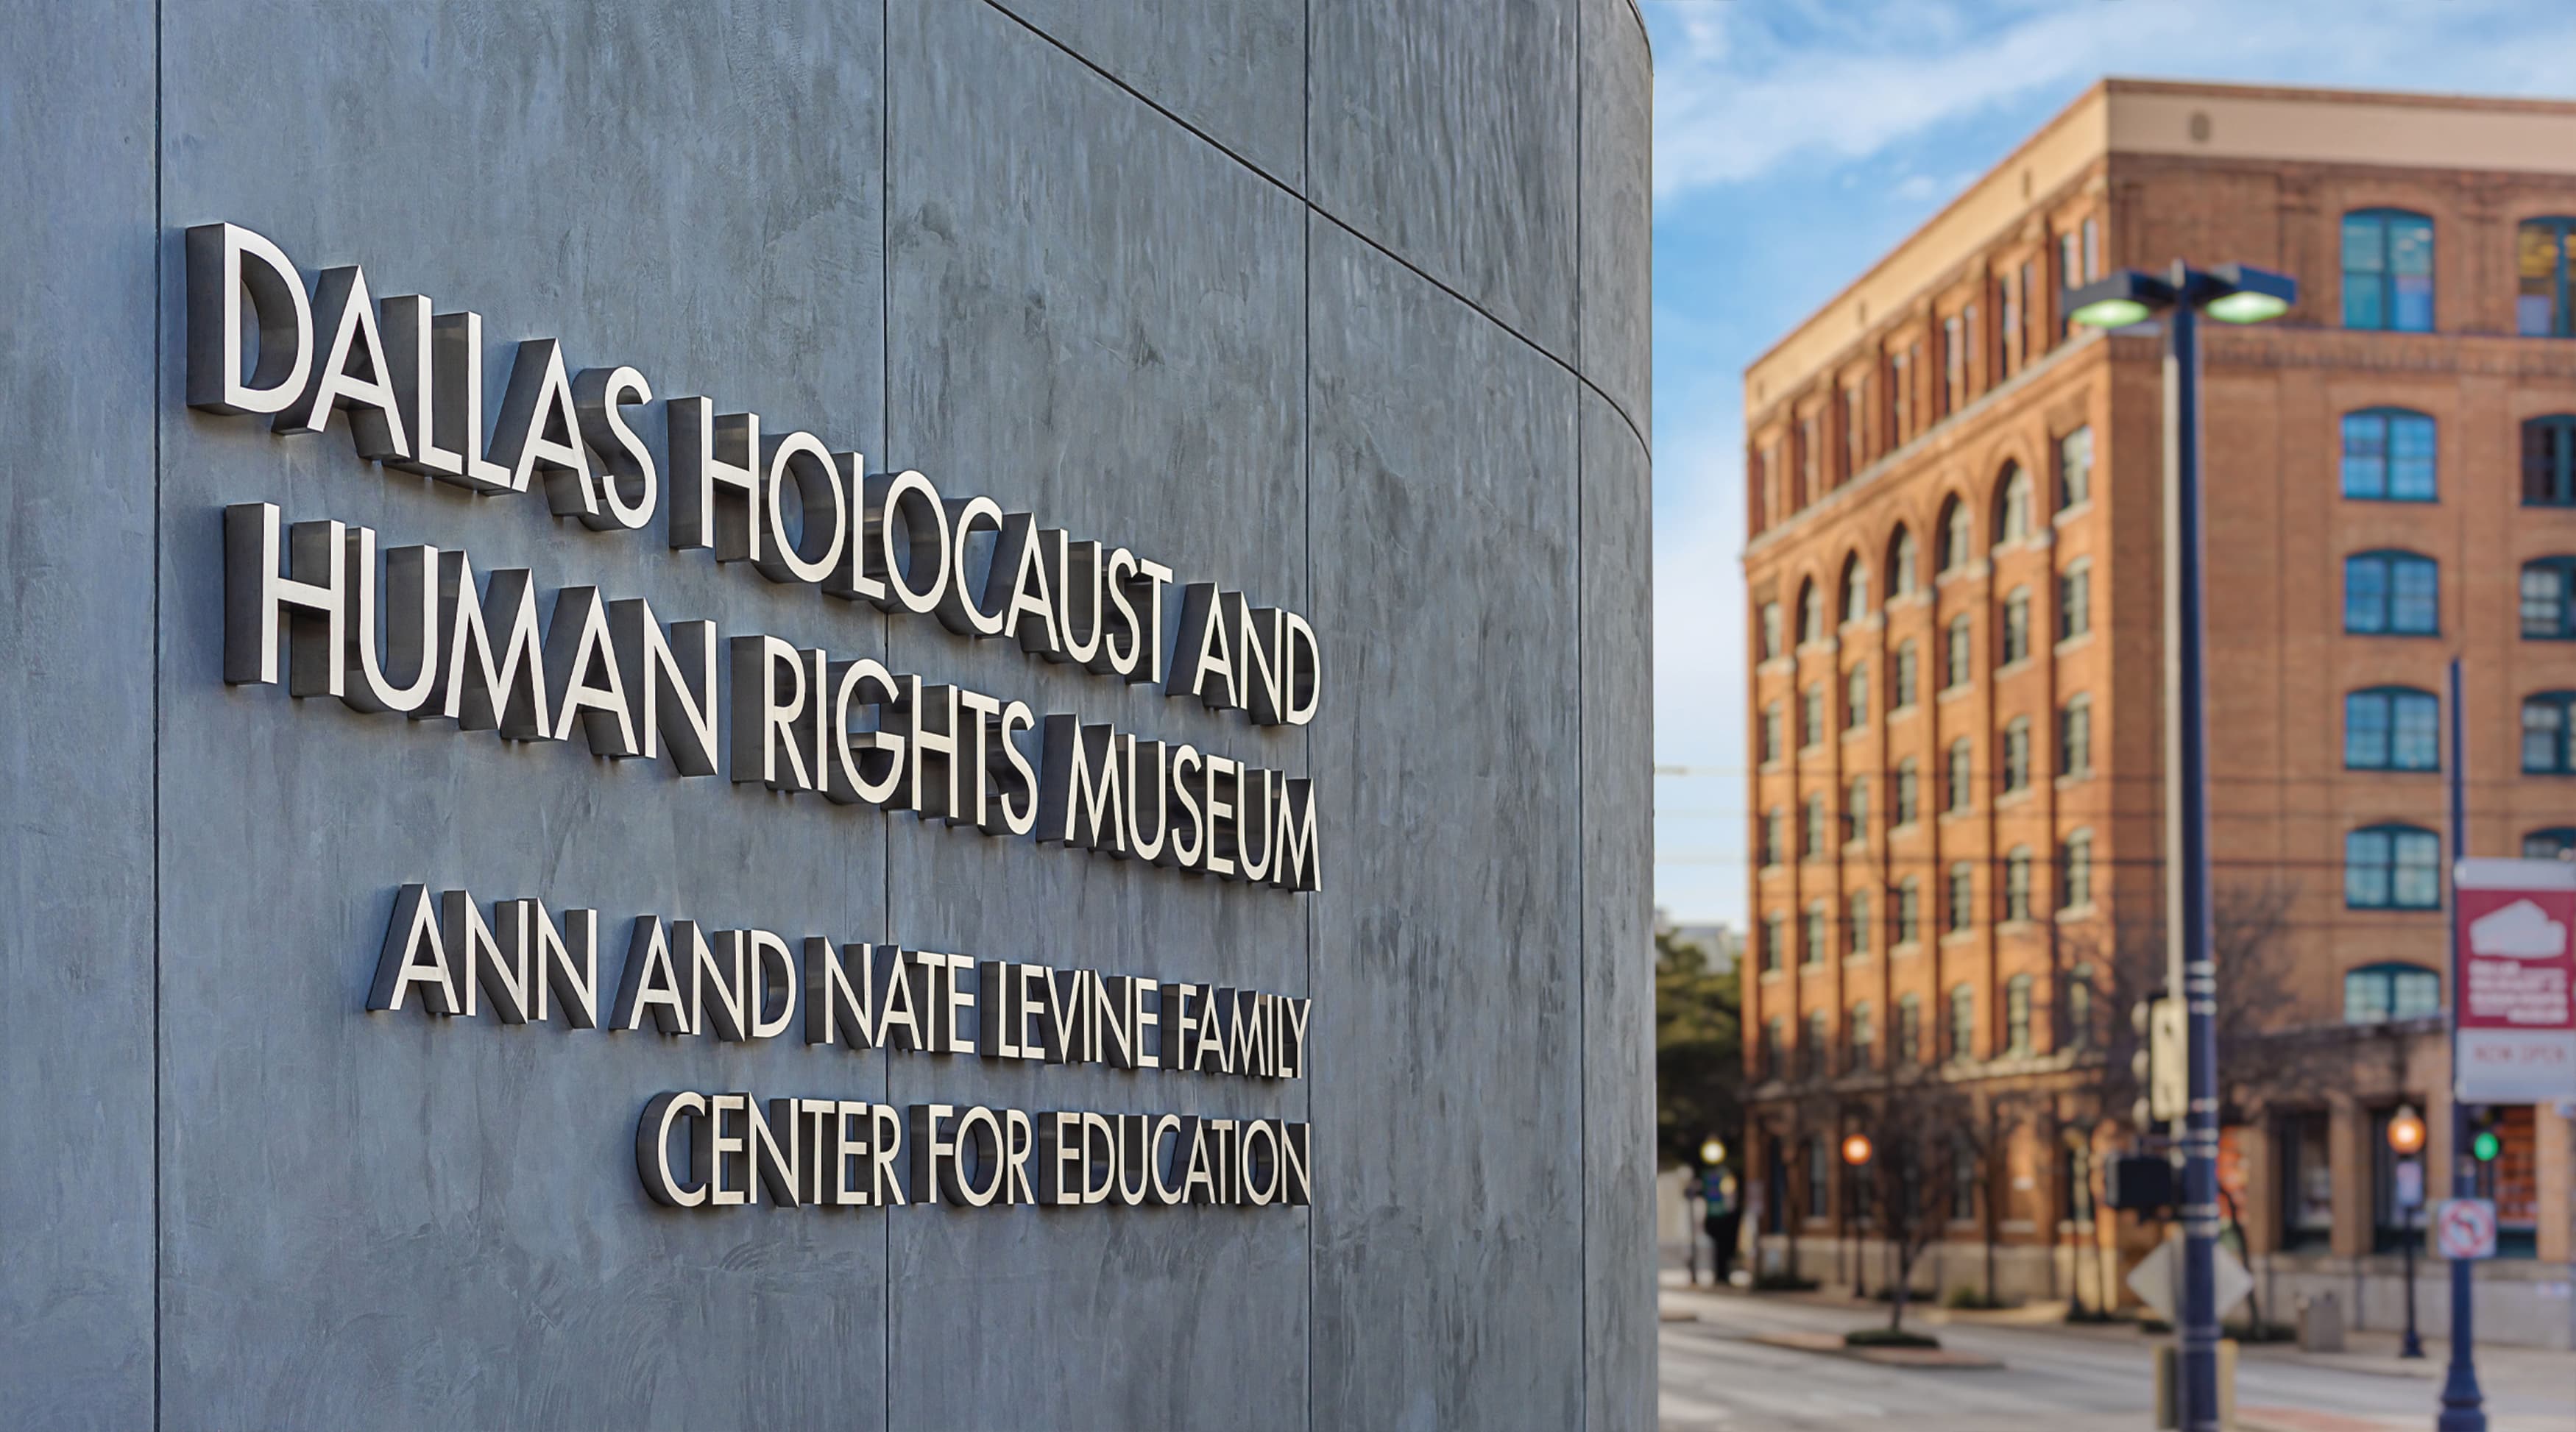 Dallas Holocaust and Human Rights Museum sign identity